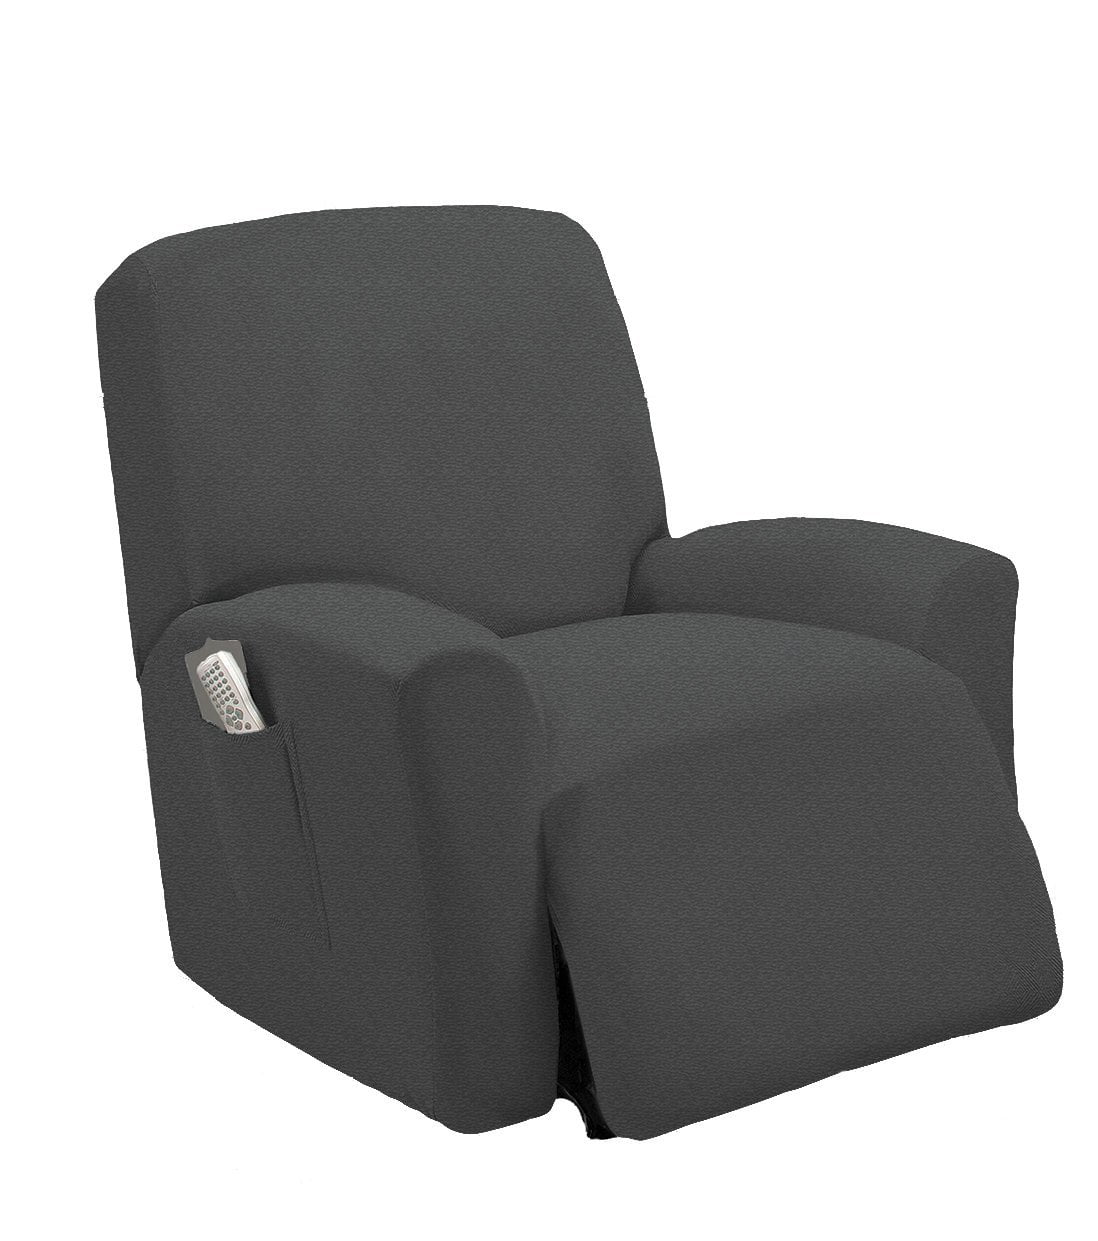 Details about   Waterproof Elastic Recliner Chair Cover Couch Cover For Living Room 13 Color 